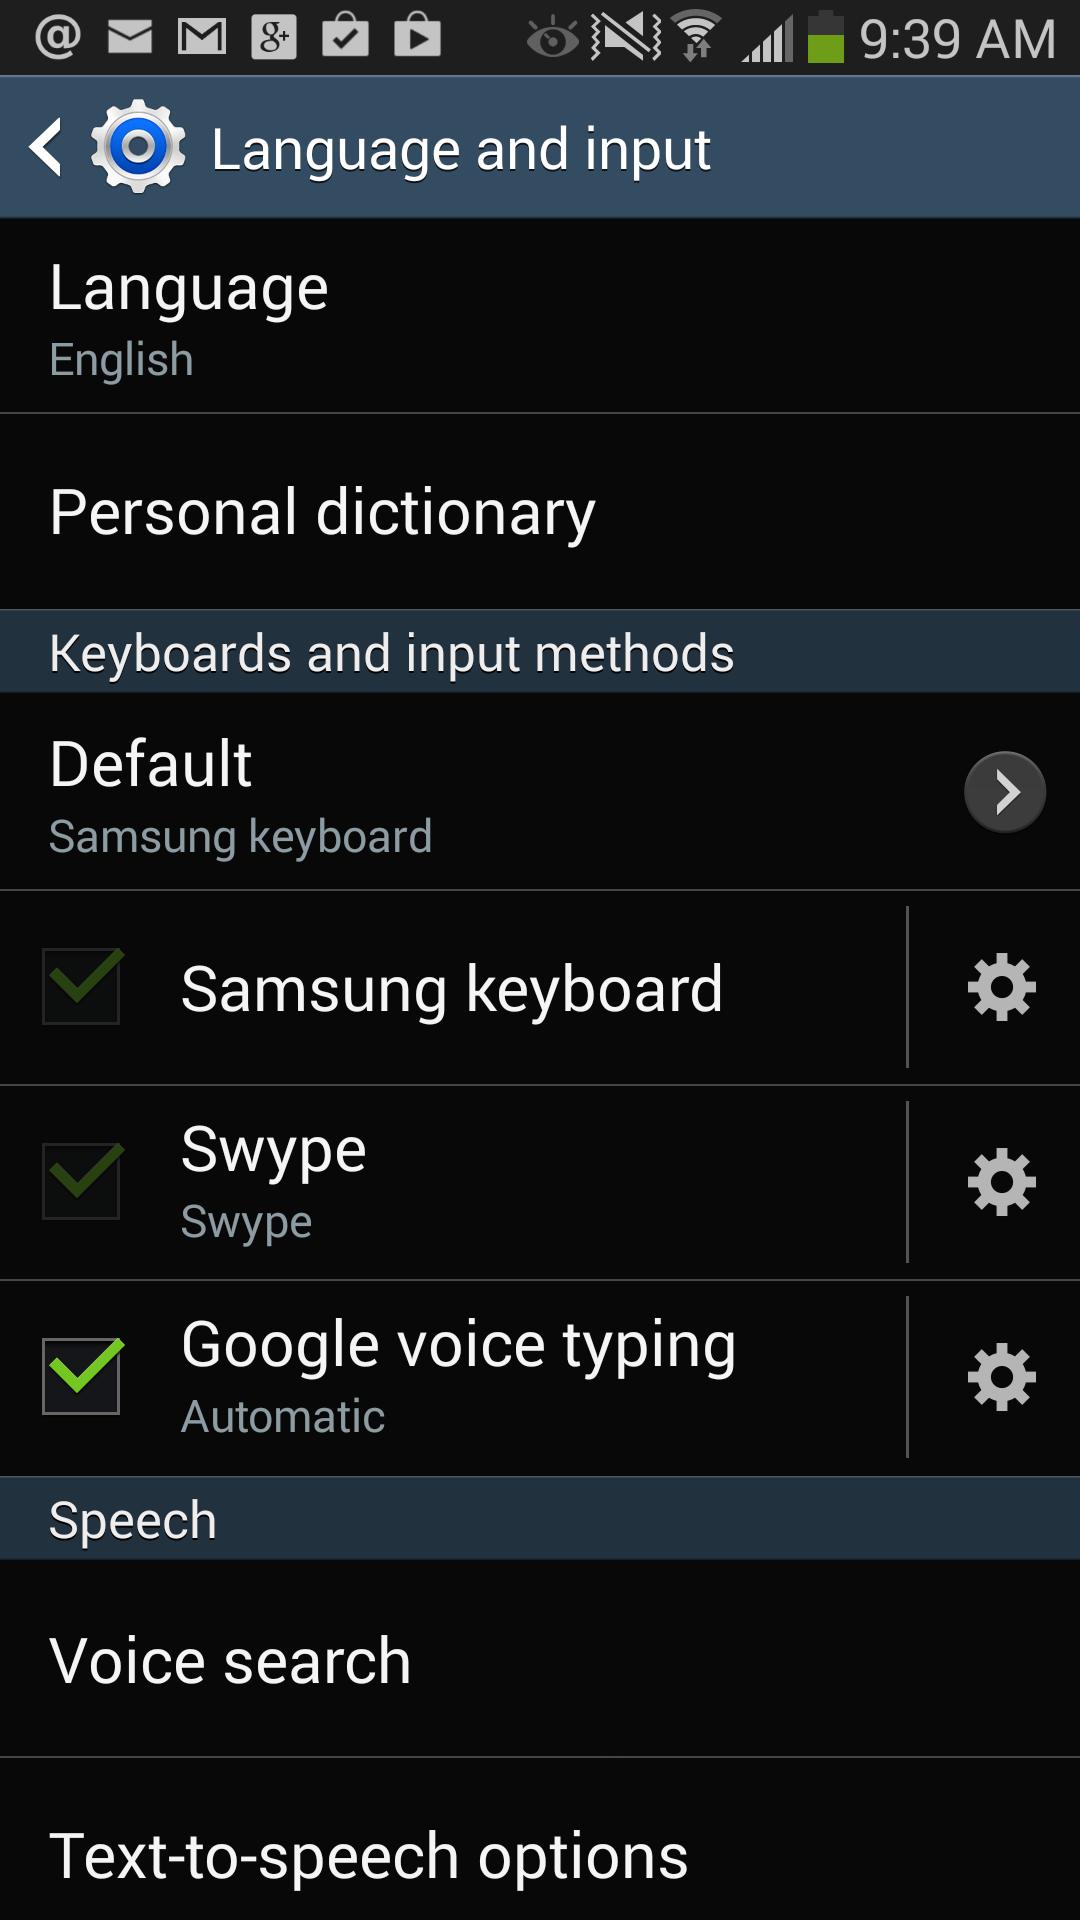 Pro tip: How to disable autocorrect on your Android keyboard 